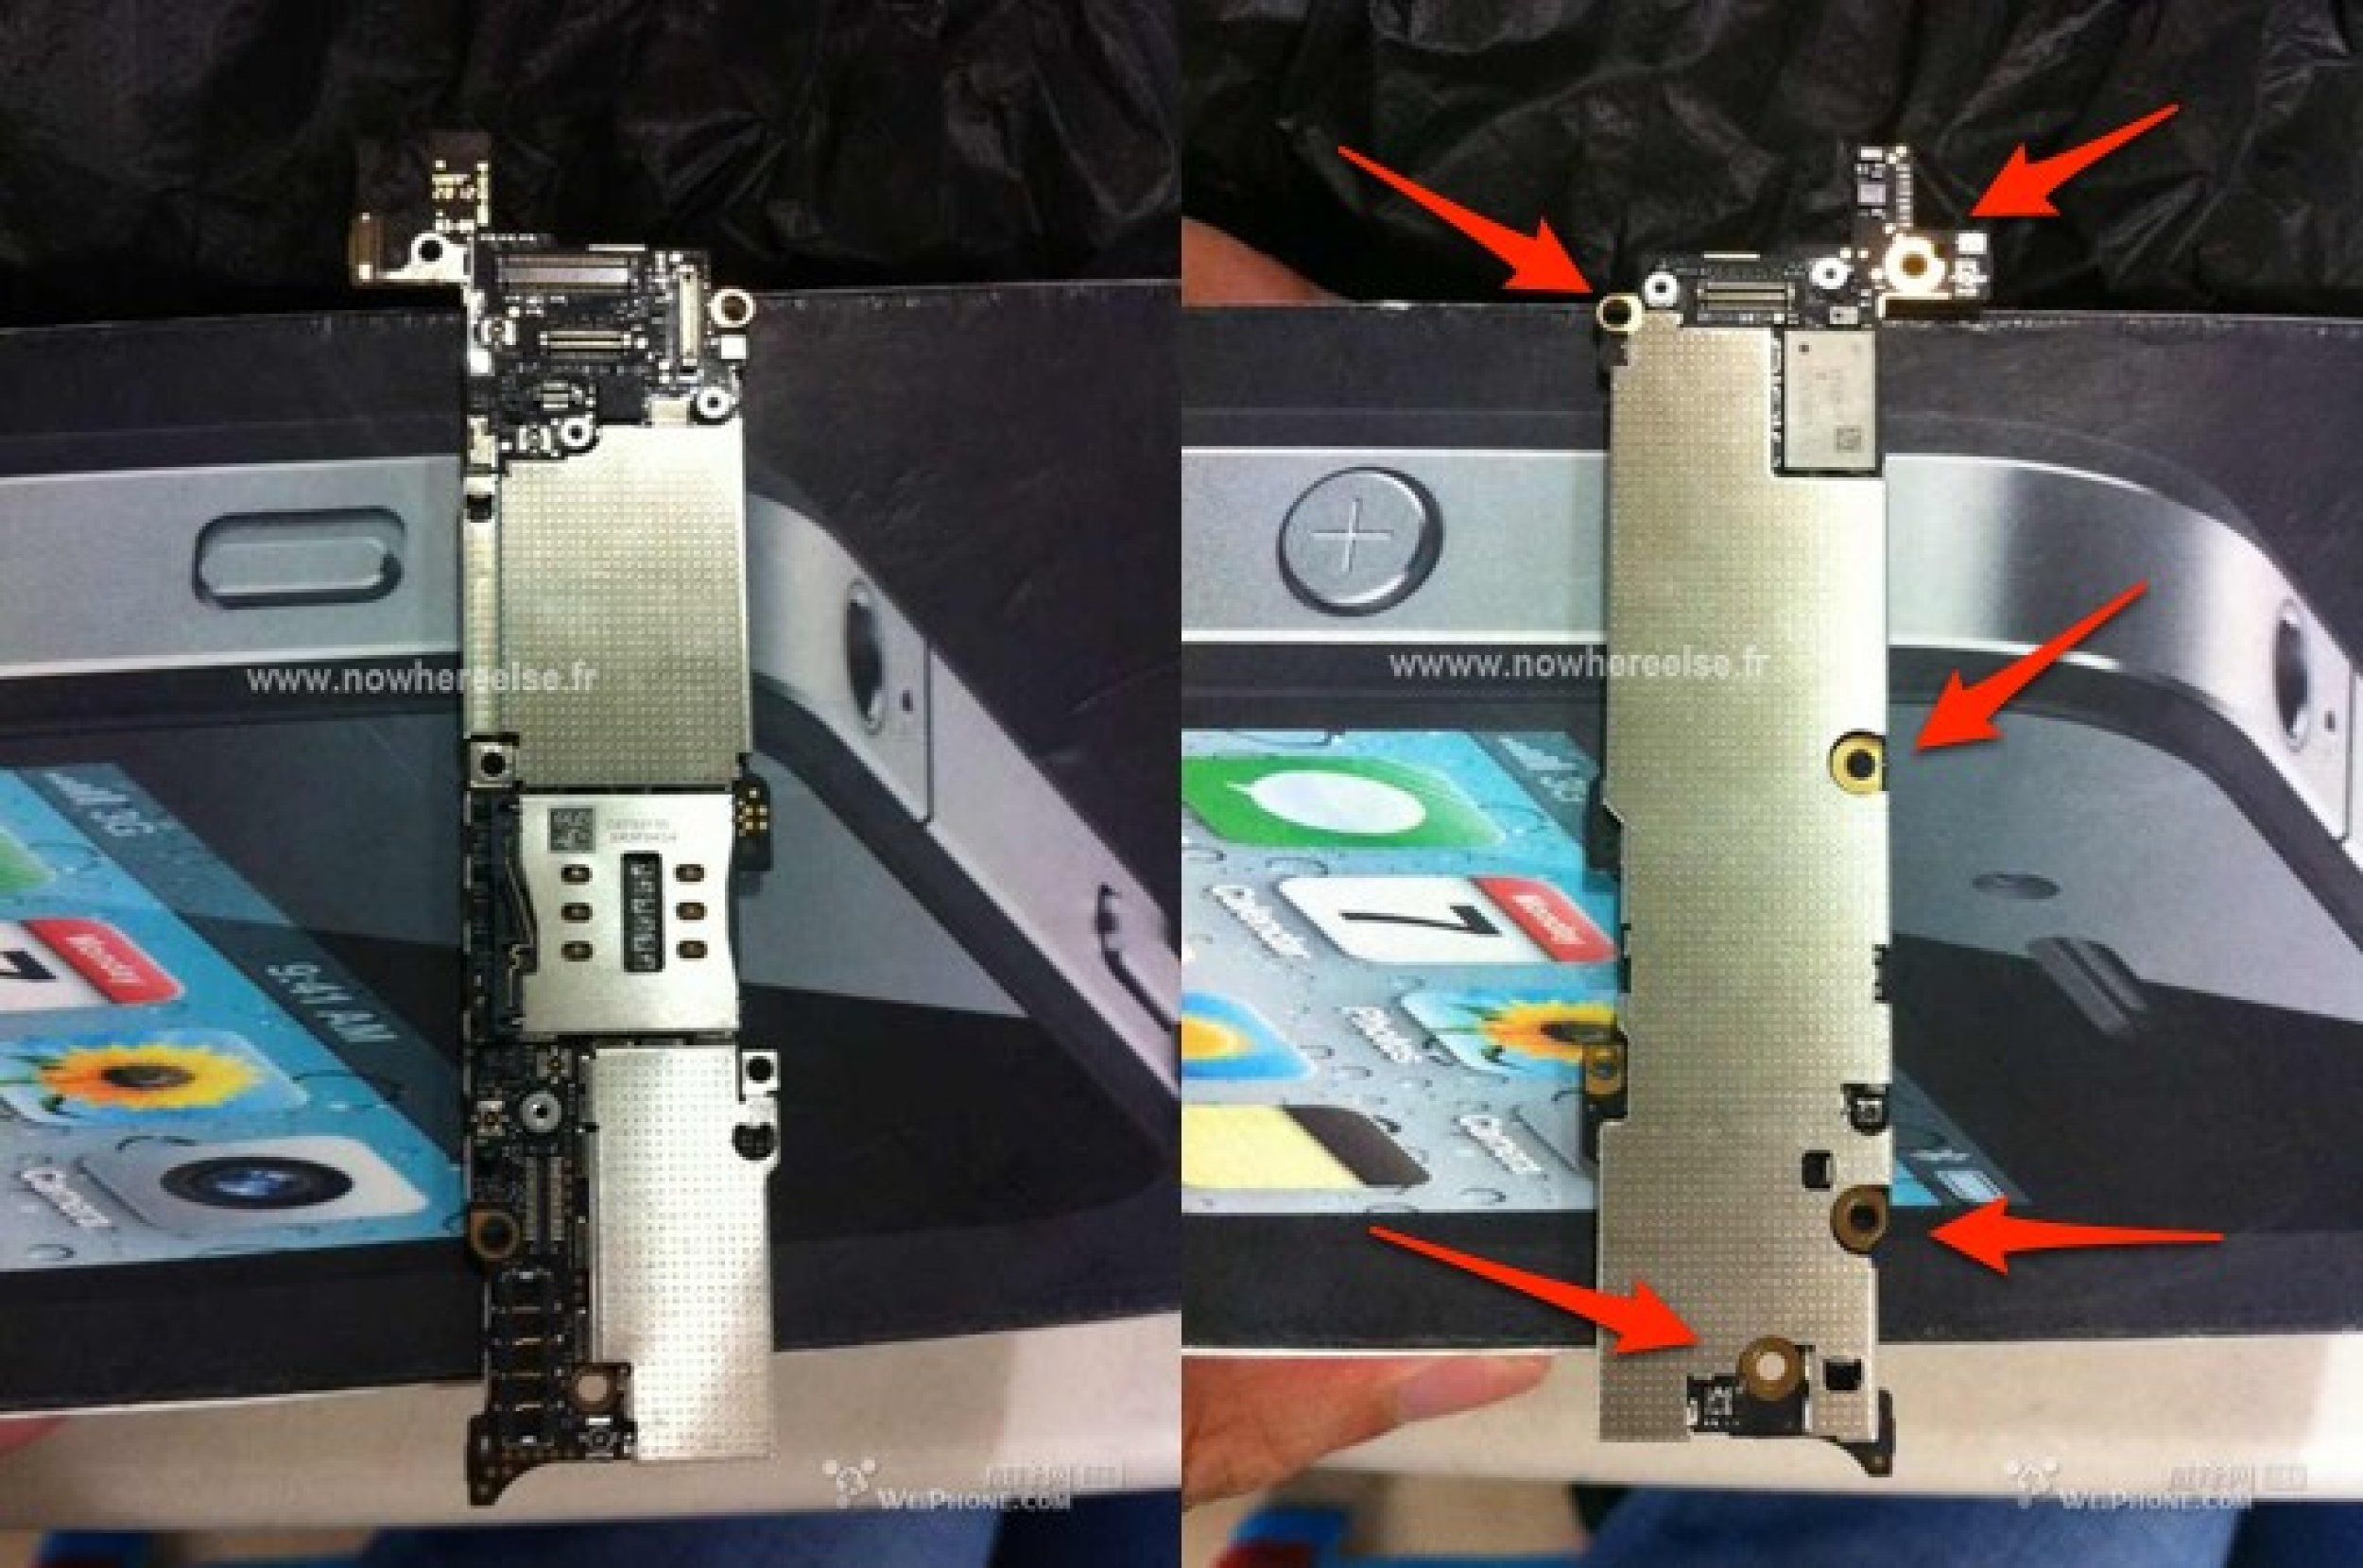 Apple iPhone 5 Features Leaked Logic Board Perfectly Fits Previous Specs Rumors, Components PICTURES